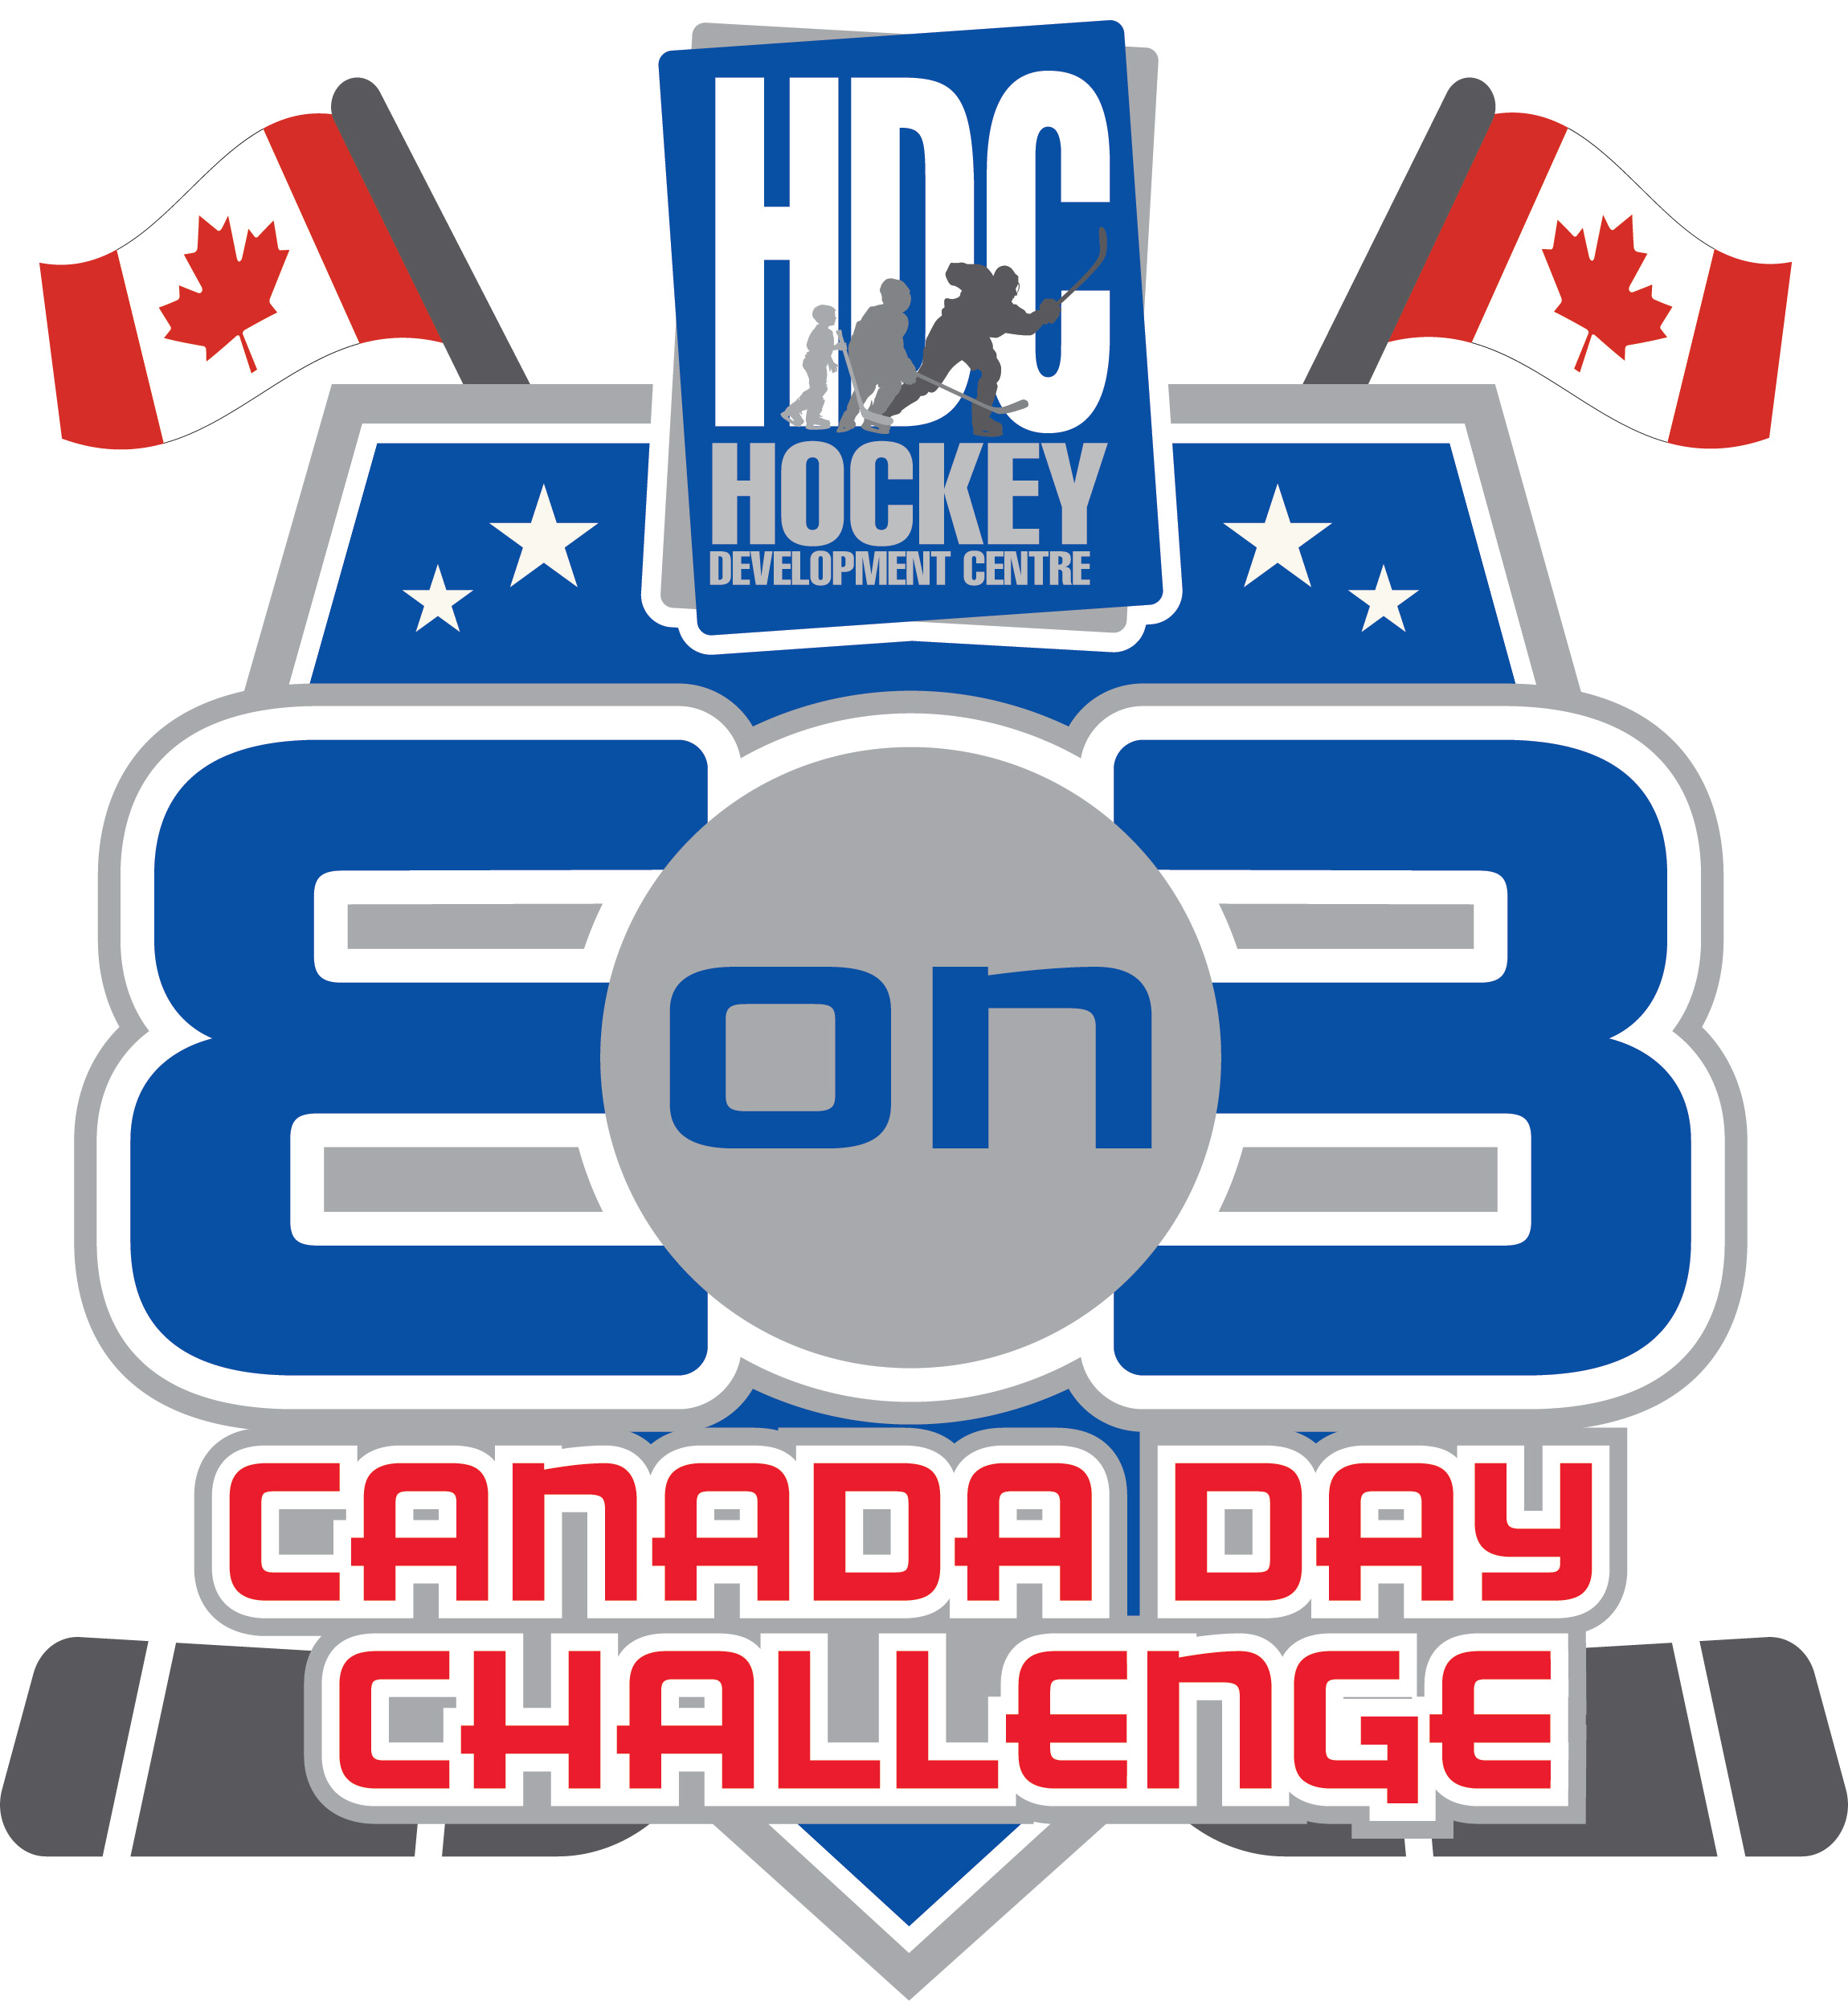 Canada Day Challenge